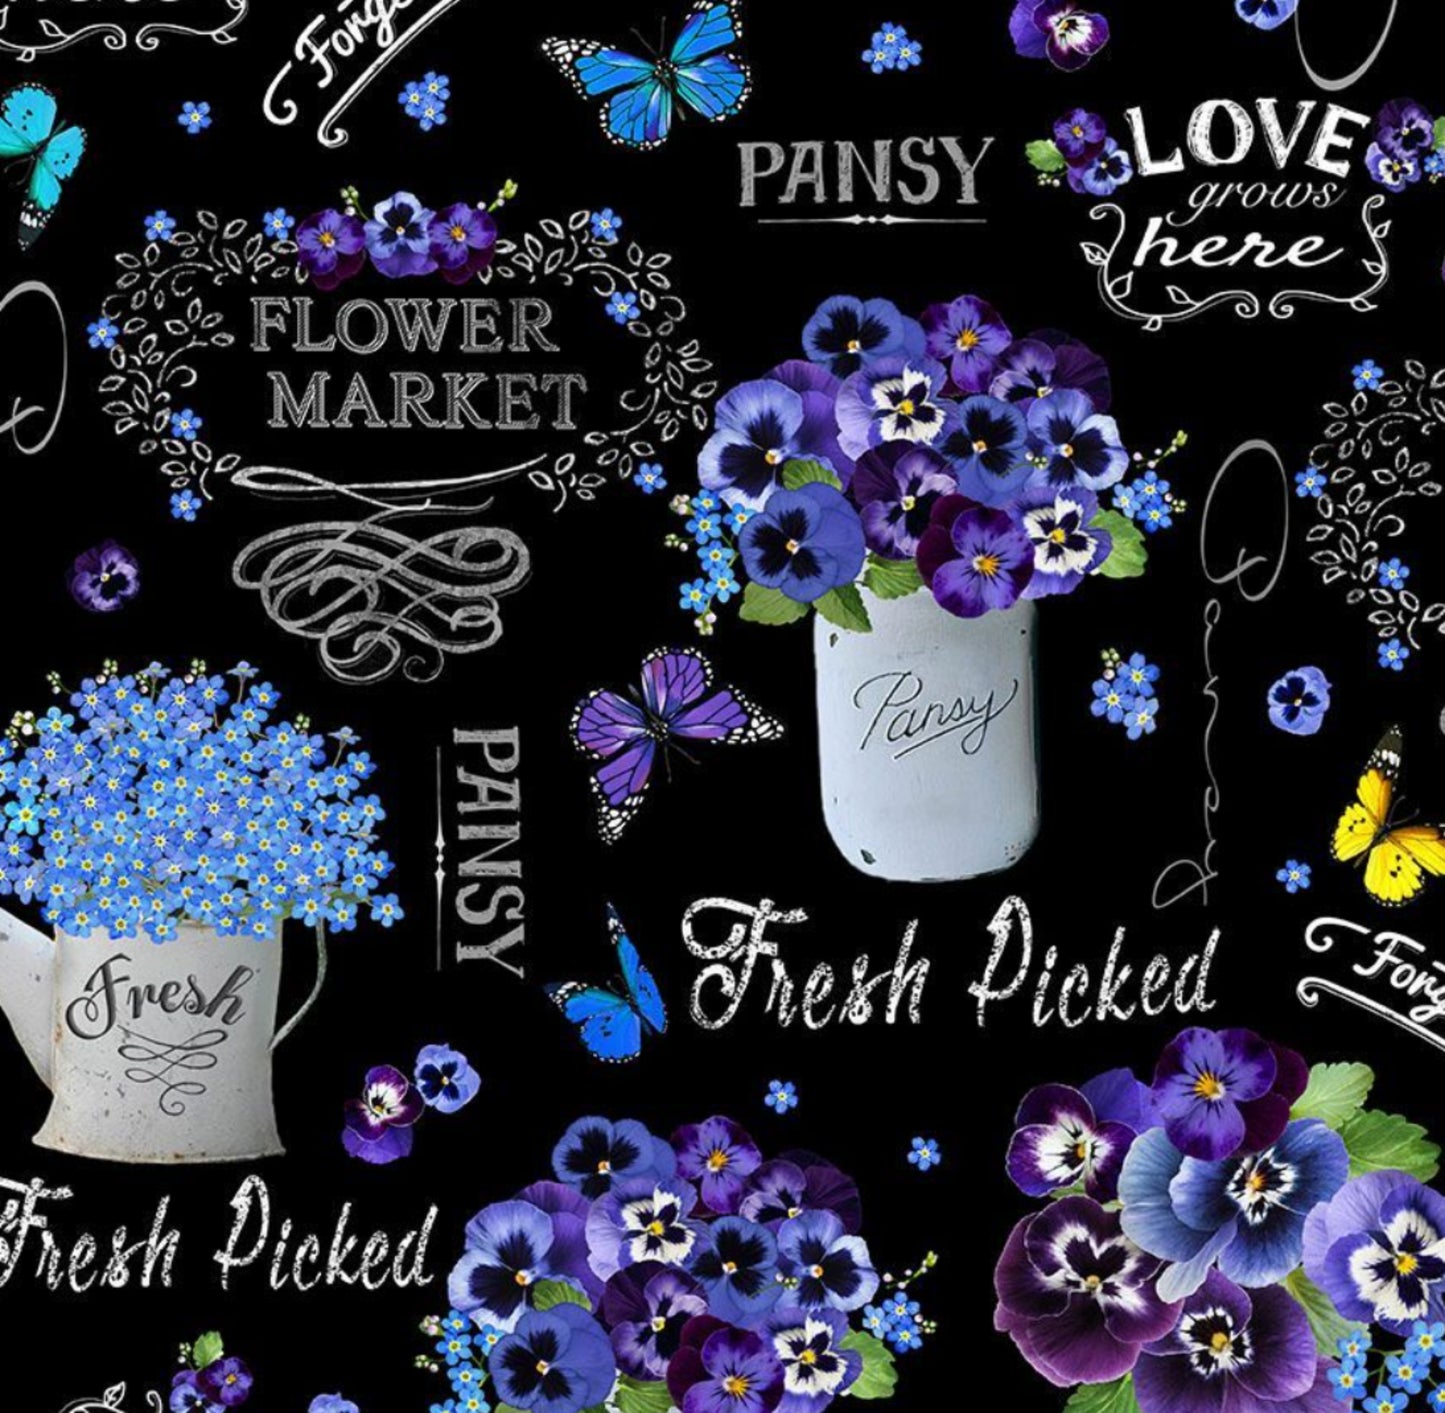 Pansy Vase and Words - Pansy Paradise - CD1890 - TTFabrics